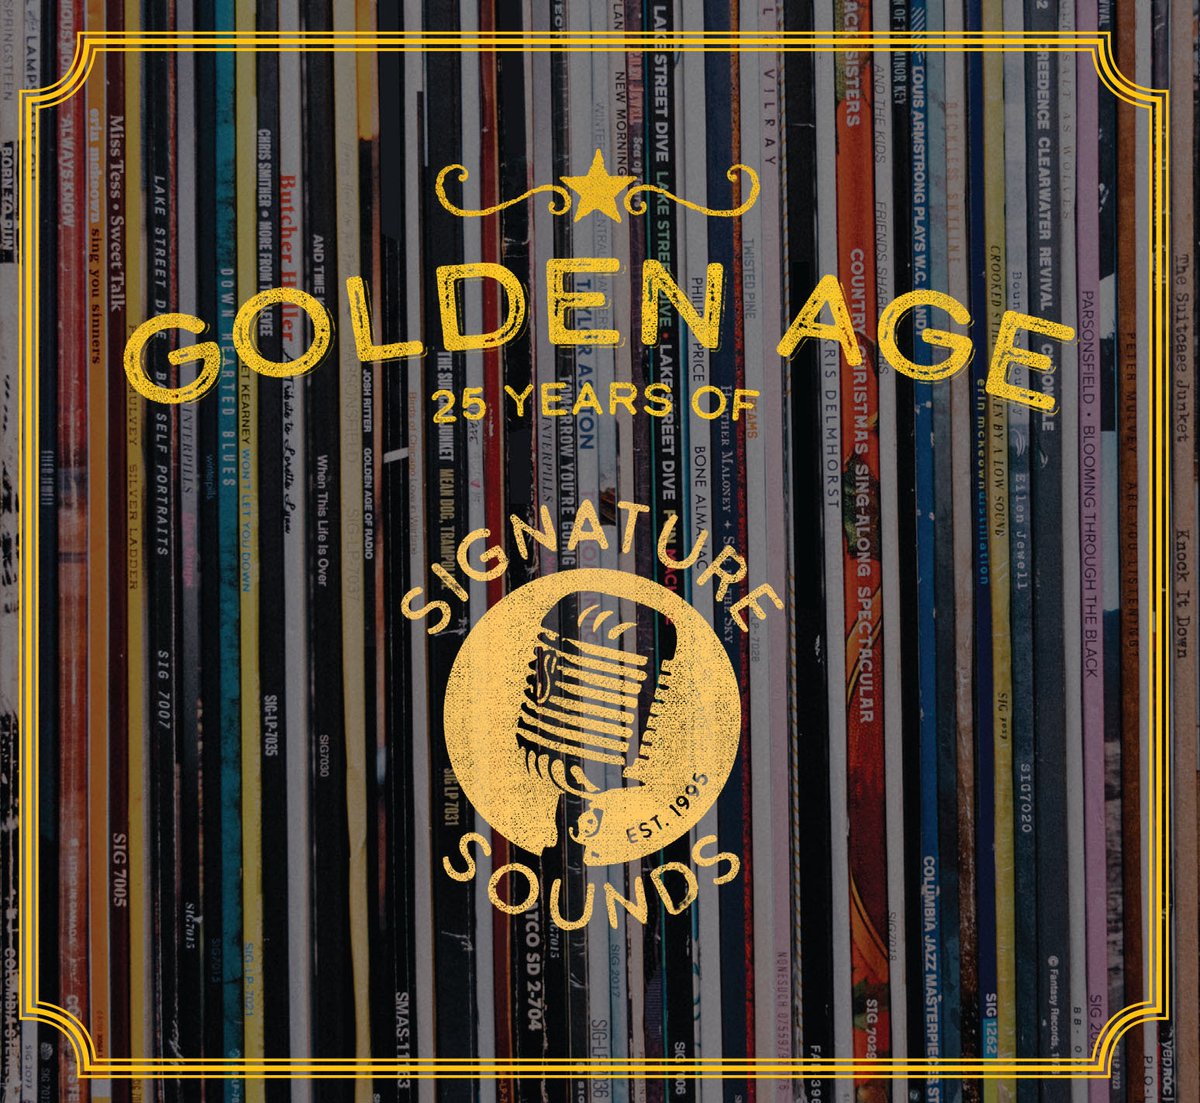 Many years ago, I release a record on @sigsoundsrec called 'Filth and Fire' - On it, I recorded a song 'Good-Bye' and now they have released an anniversary album 'Golden Age: 25 Years of Signature Sounds' 💽 This double-album features my track. Out now! bit.ly/3qH4Xi4